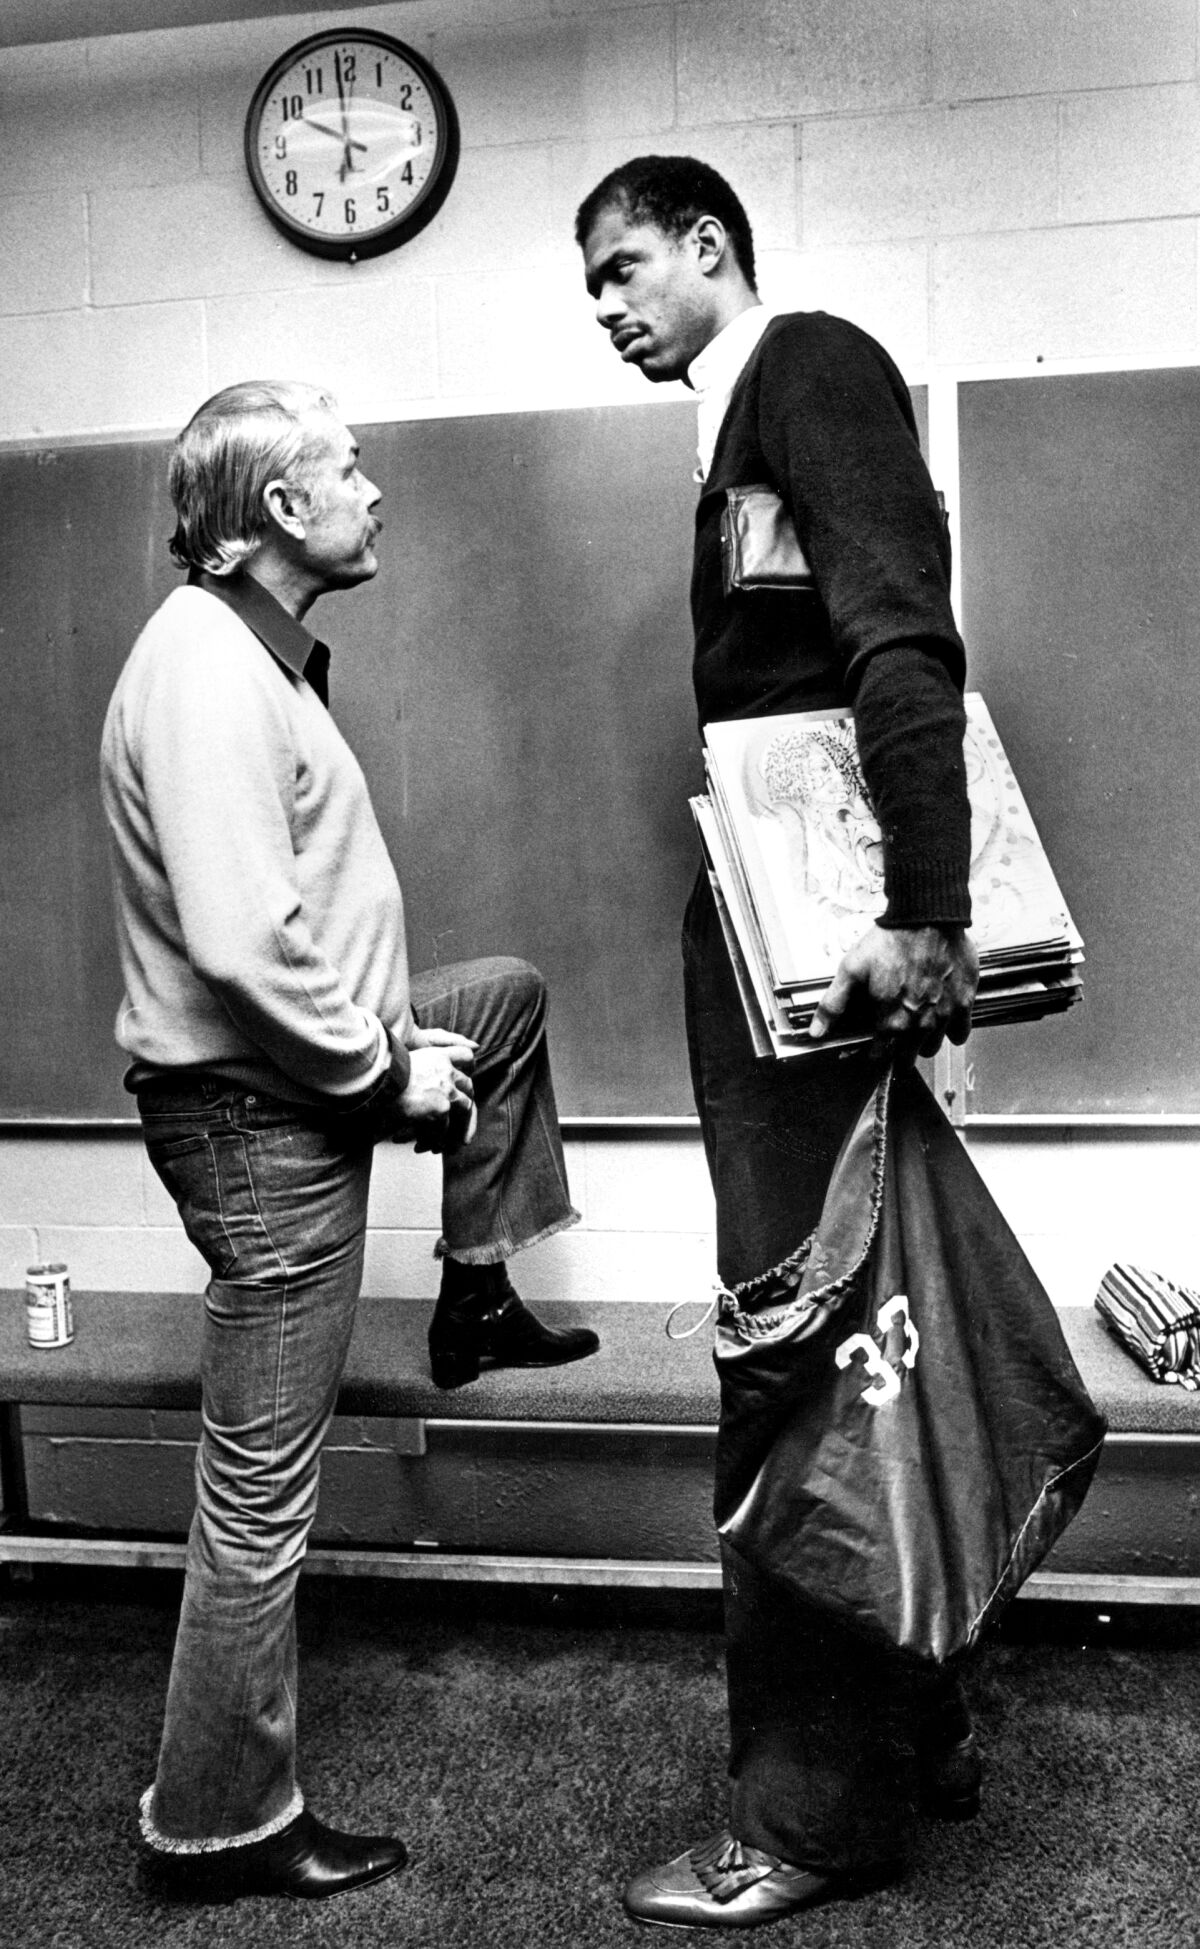 Feb. 14, 1983: Lakers owner Jerry Buss talks with Kareem Abdul-Jabbar in Lakers locker room following a game.